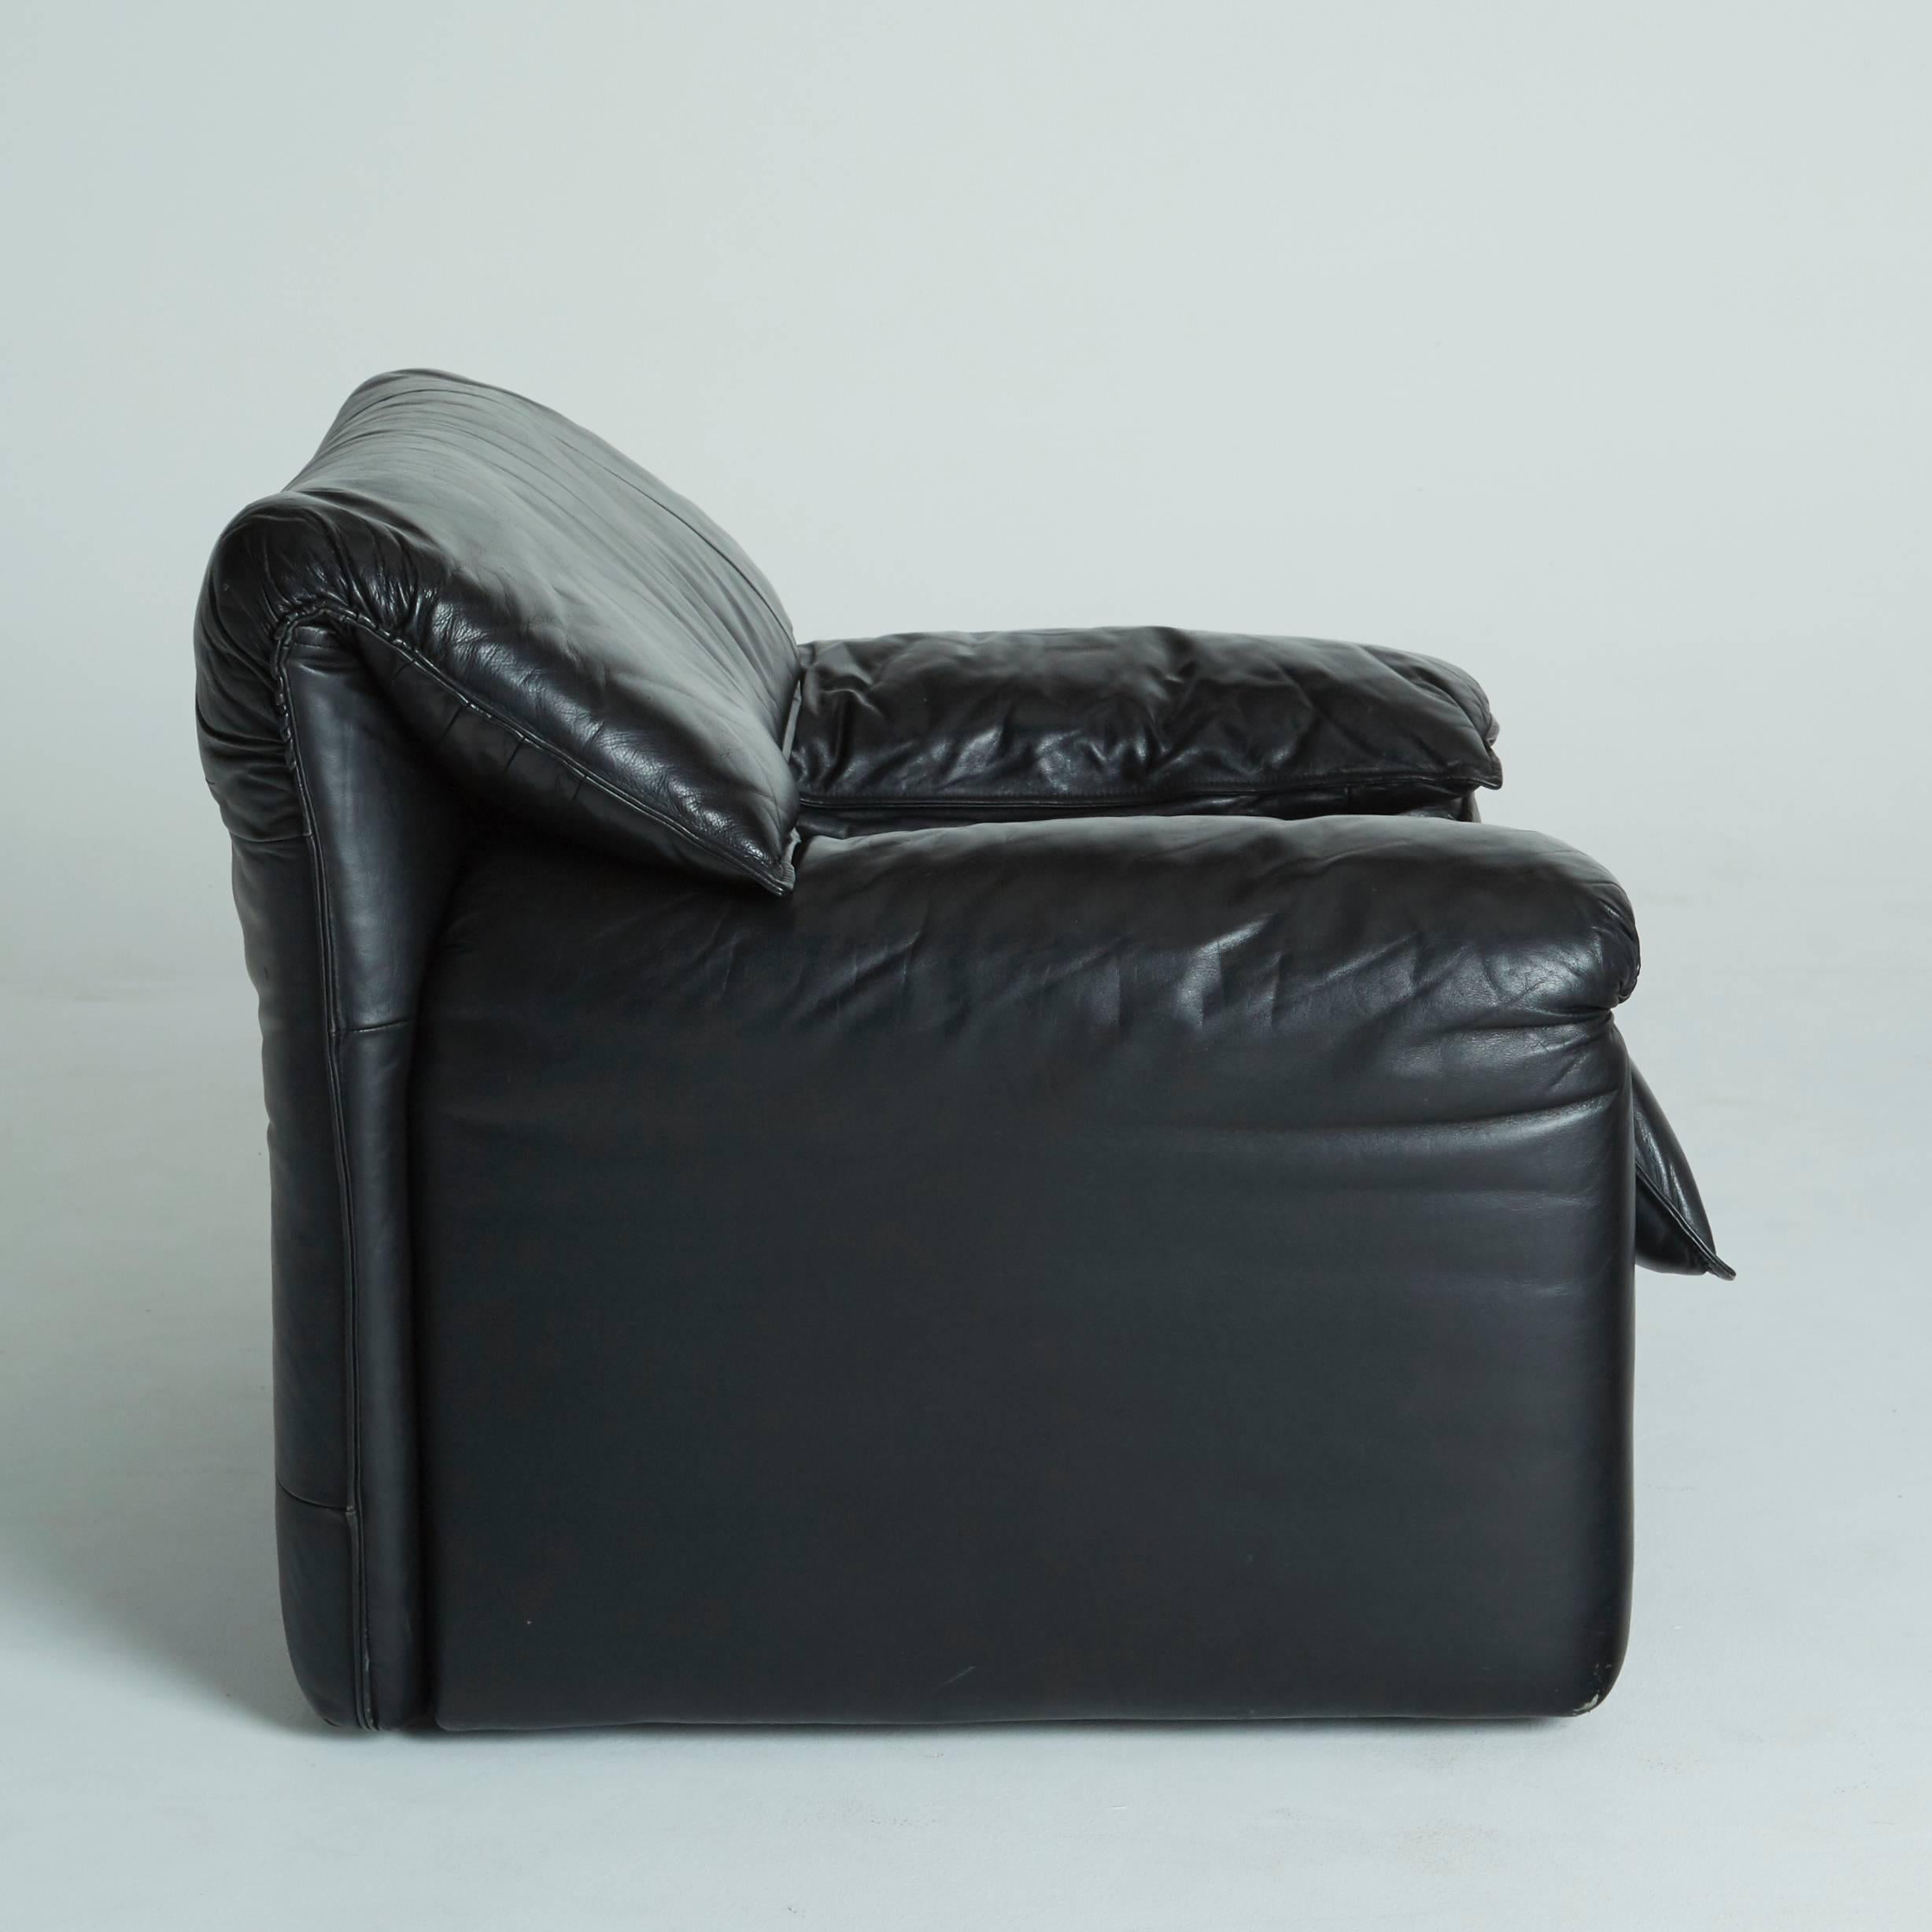 Modern Maralunga Style Black Leather Armchairs with Adjustable Headrests 